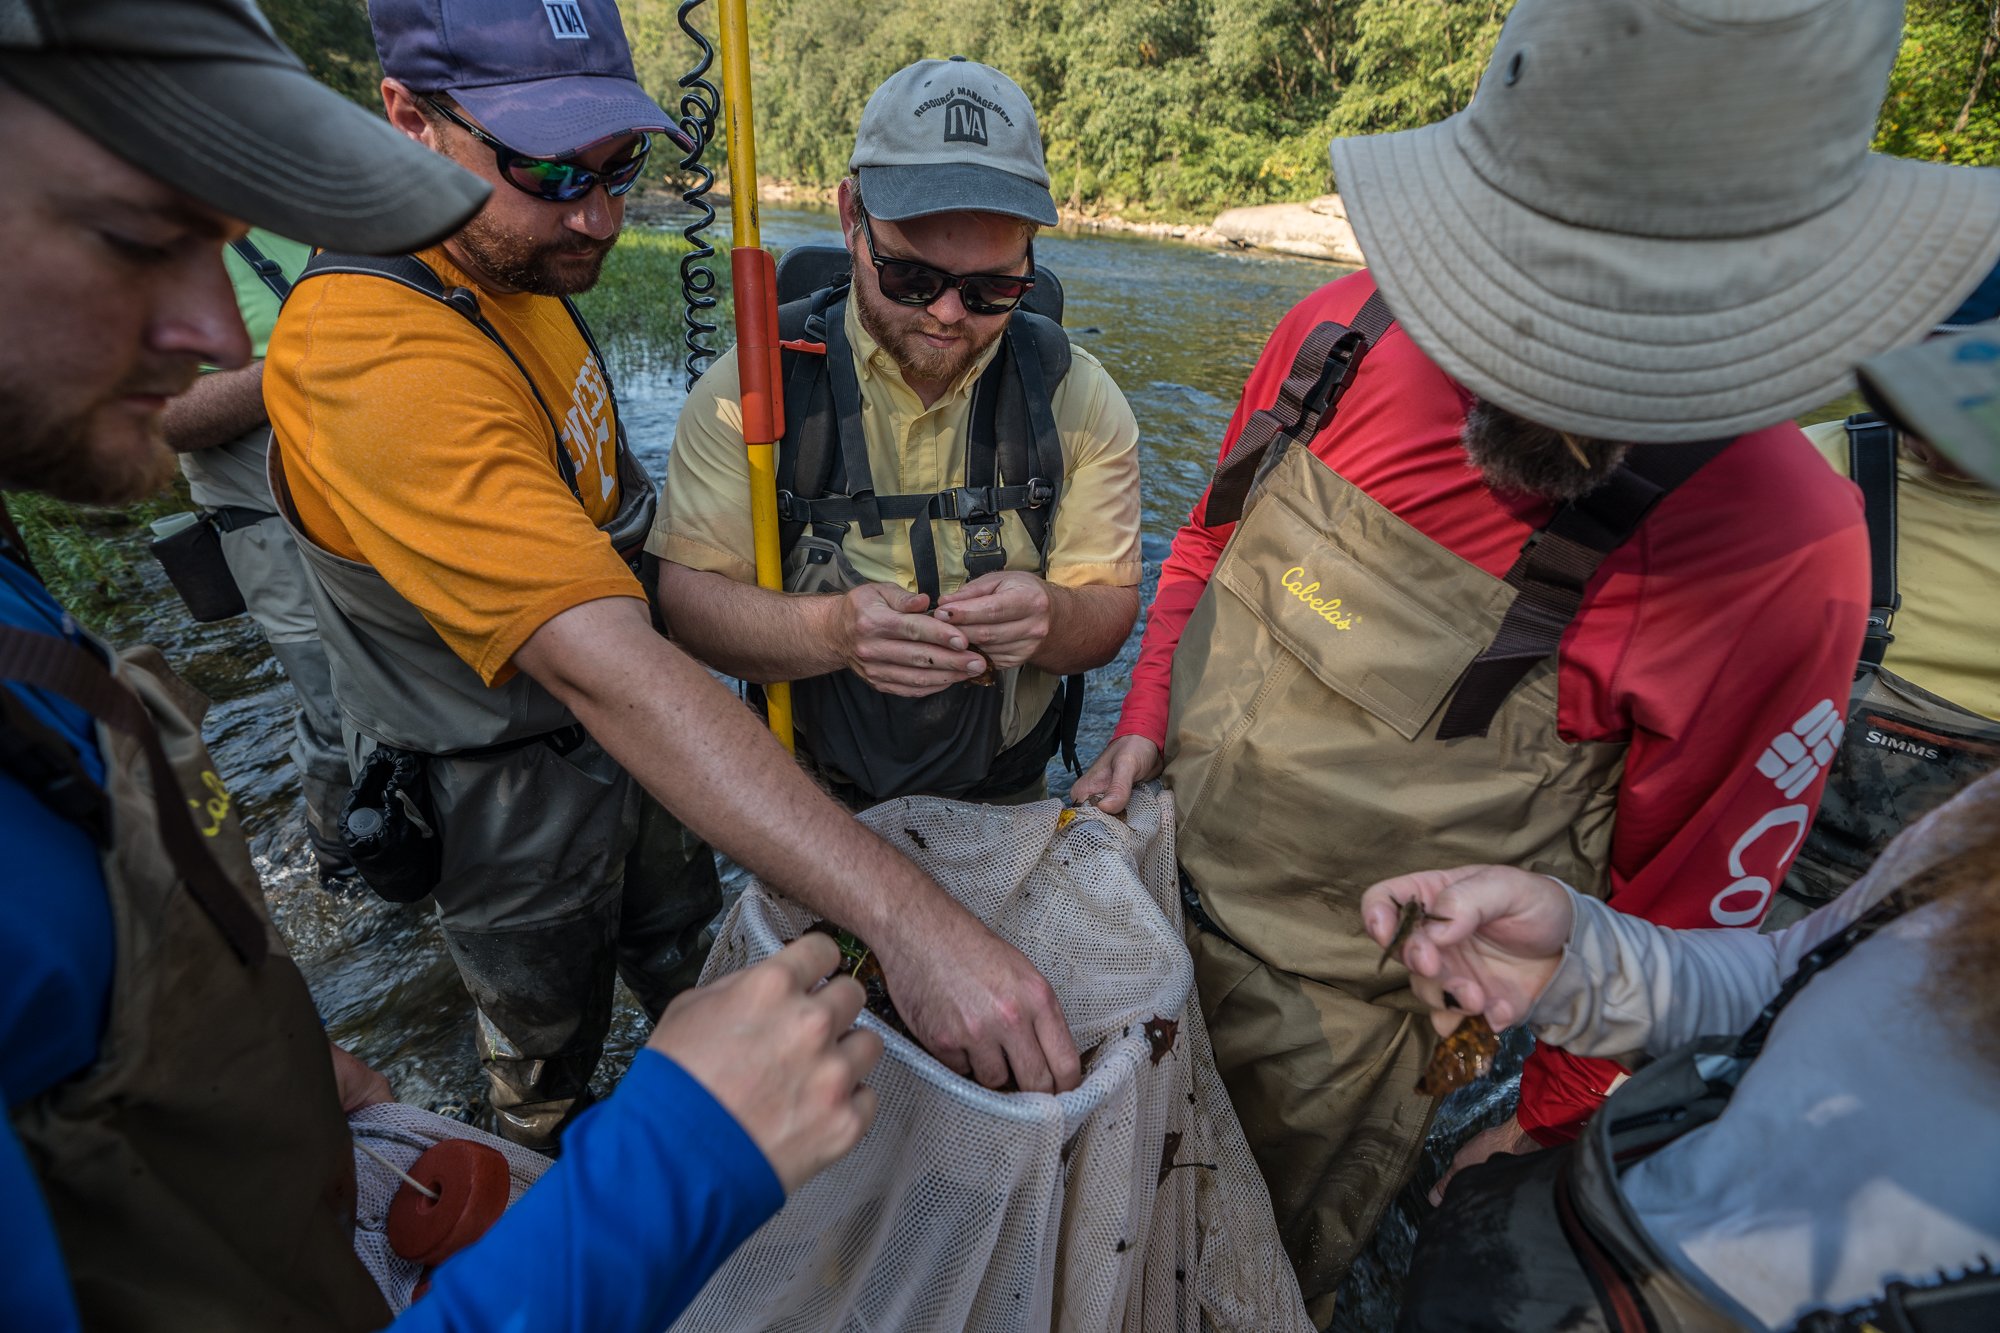 TVA Discovers New Fish Species in Tennessee River Watershed